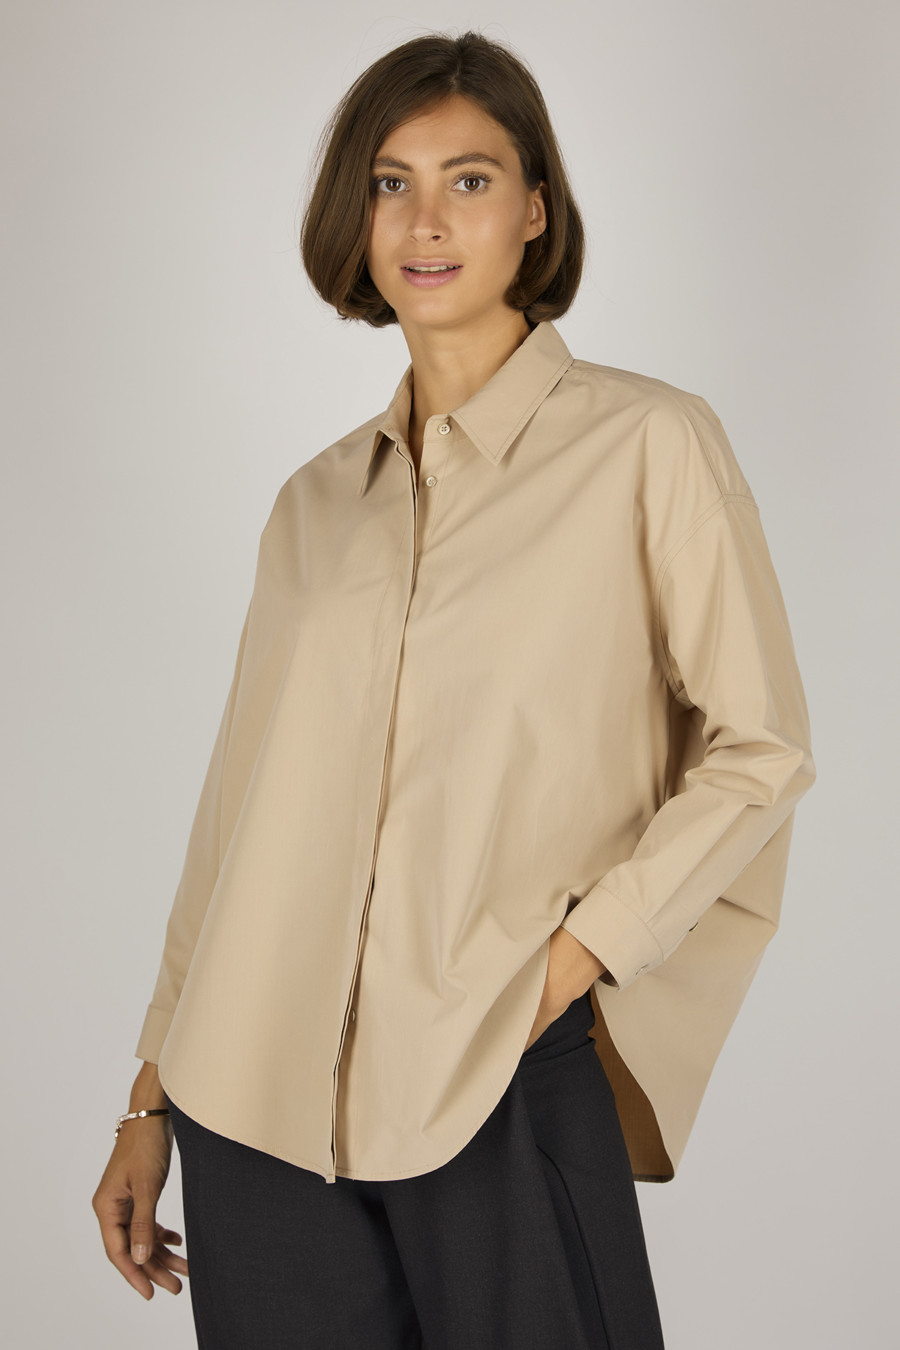 BRITT – Side ruffled shirt blouse – Color: Trench